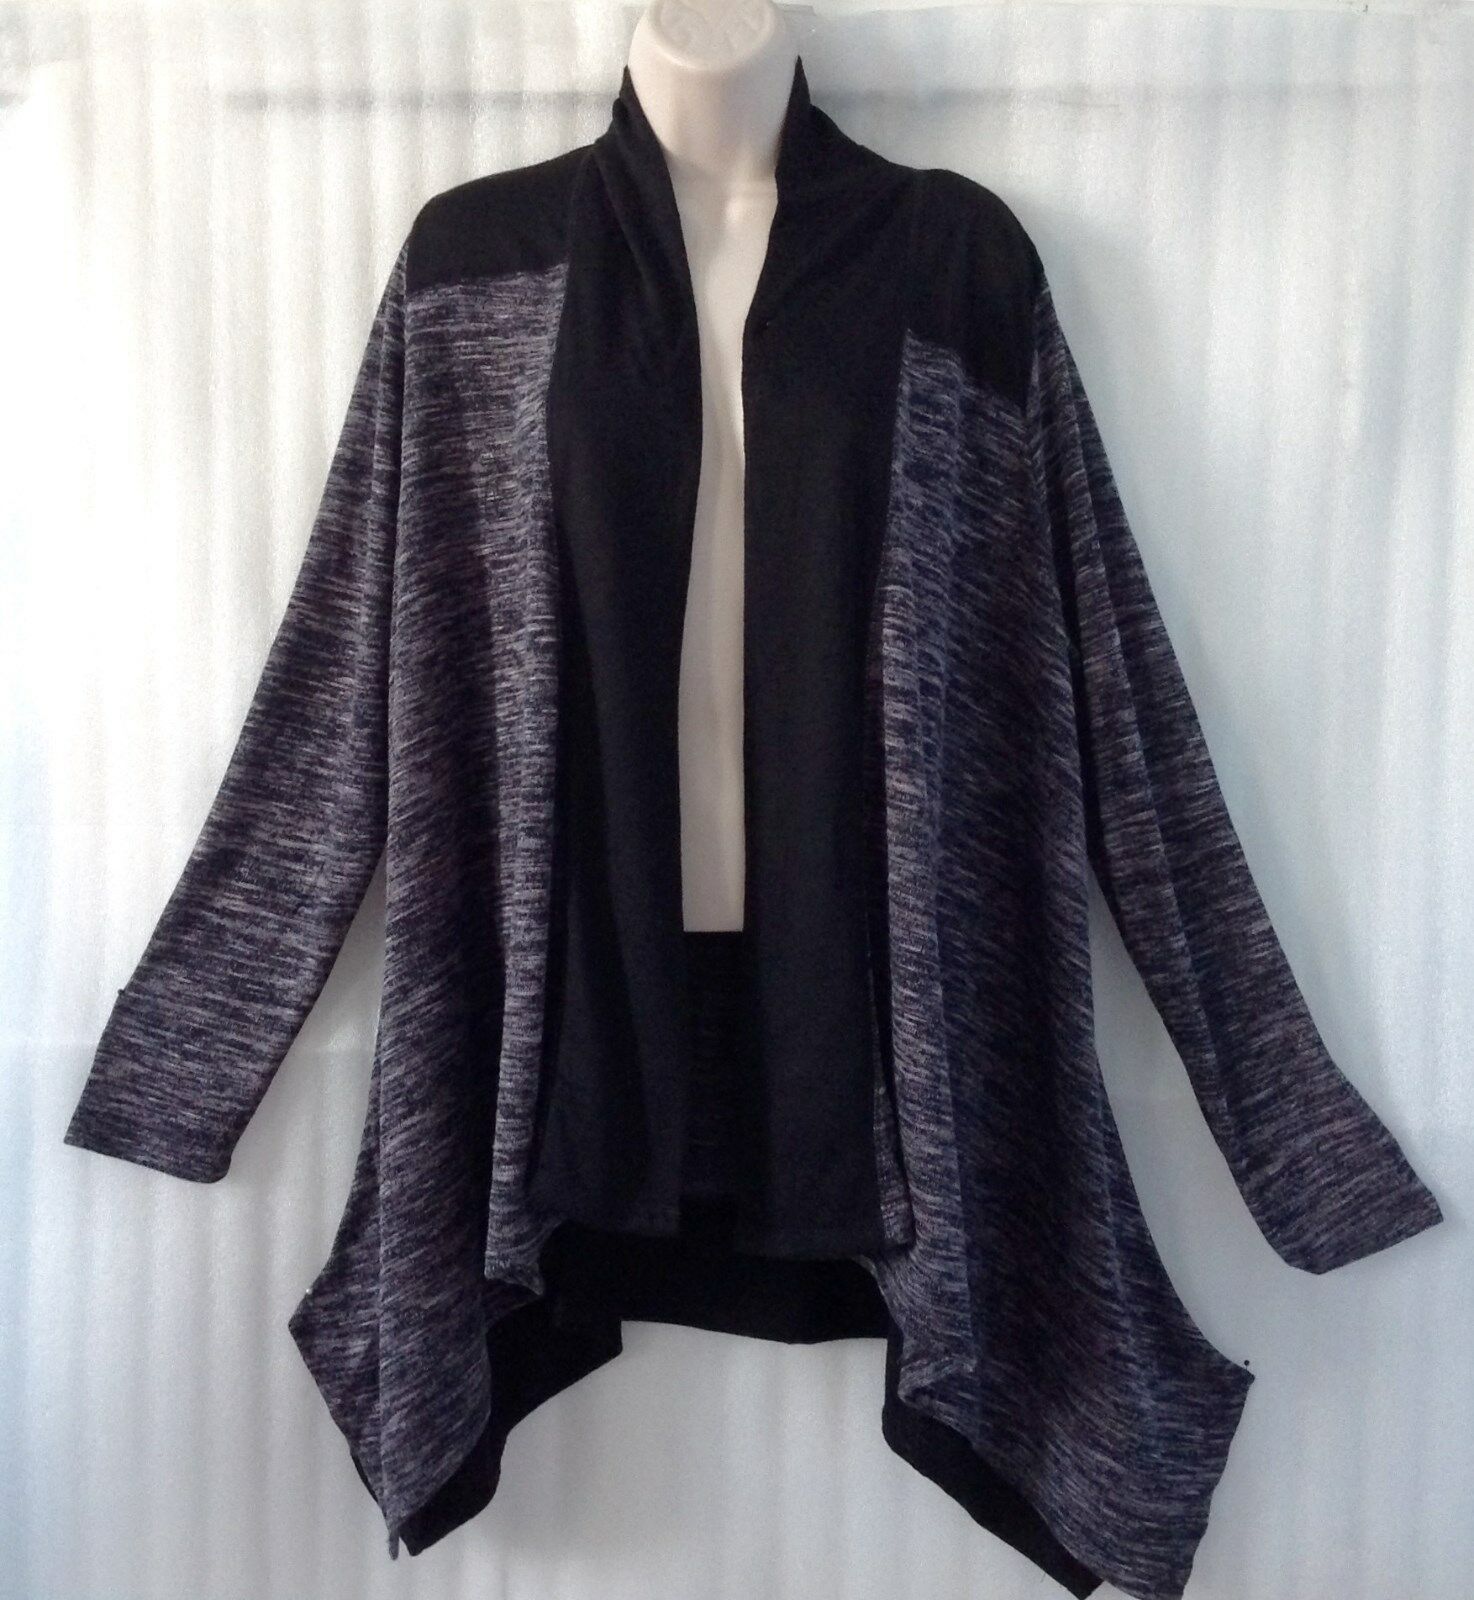 Primary image for Andrea Jovine Women's Plus size Cardigan 18/0X/1X Black Gray Knit Top New $78